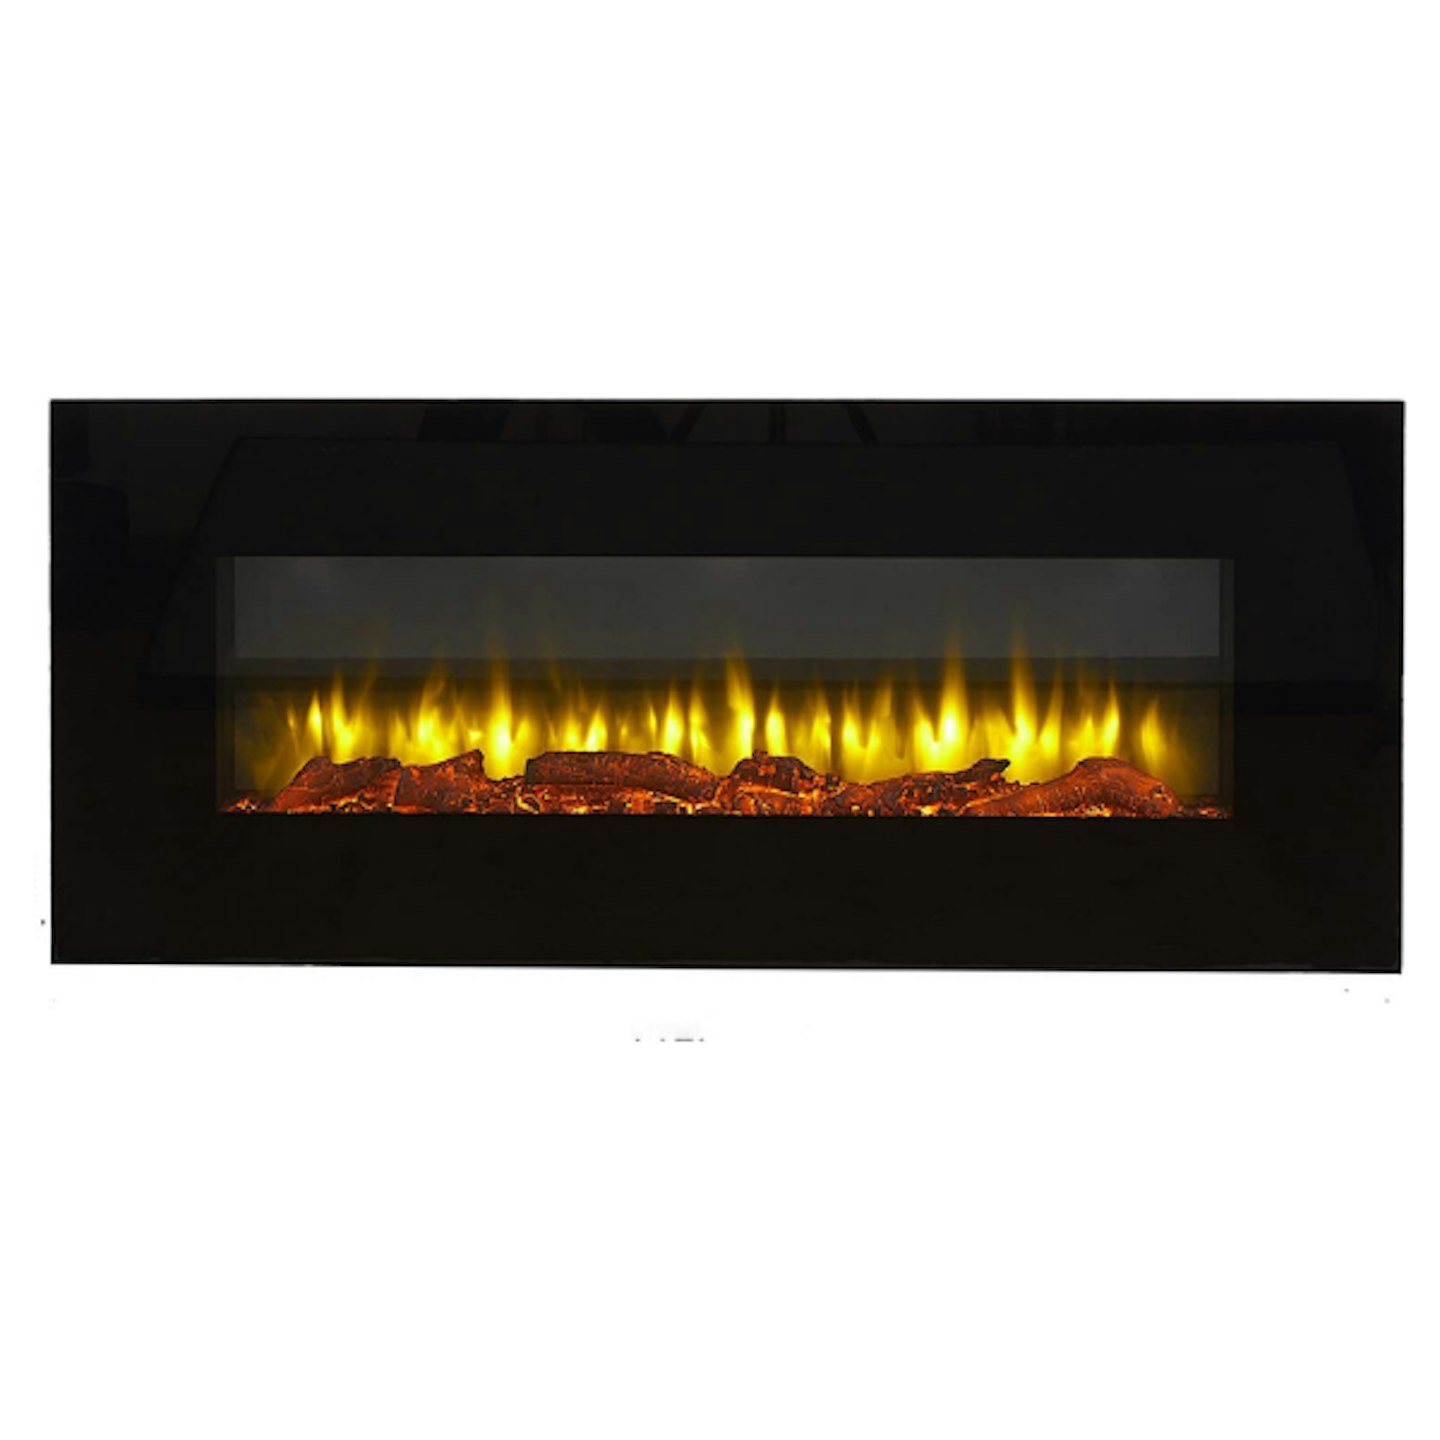 An Endeavour electric fireplace